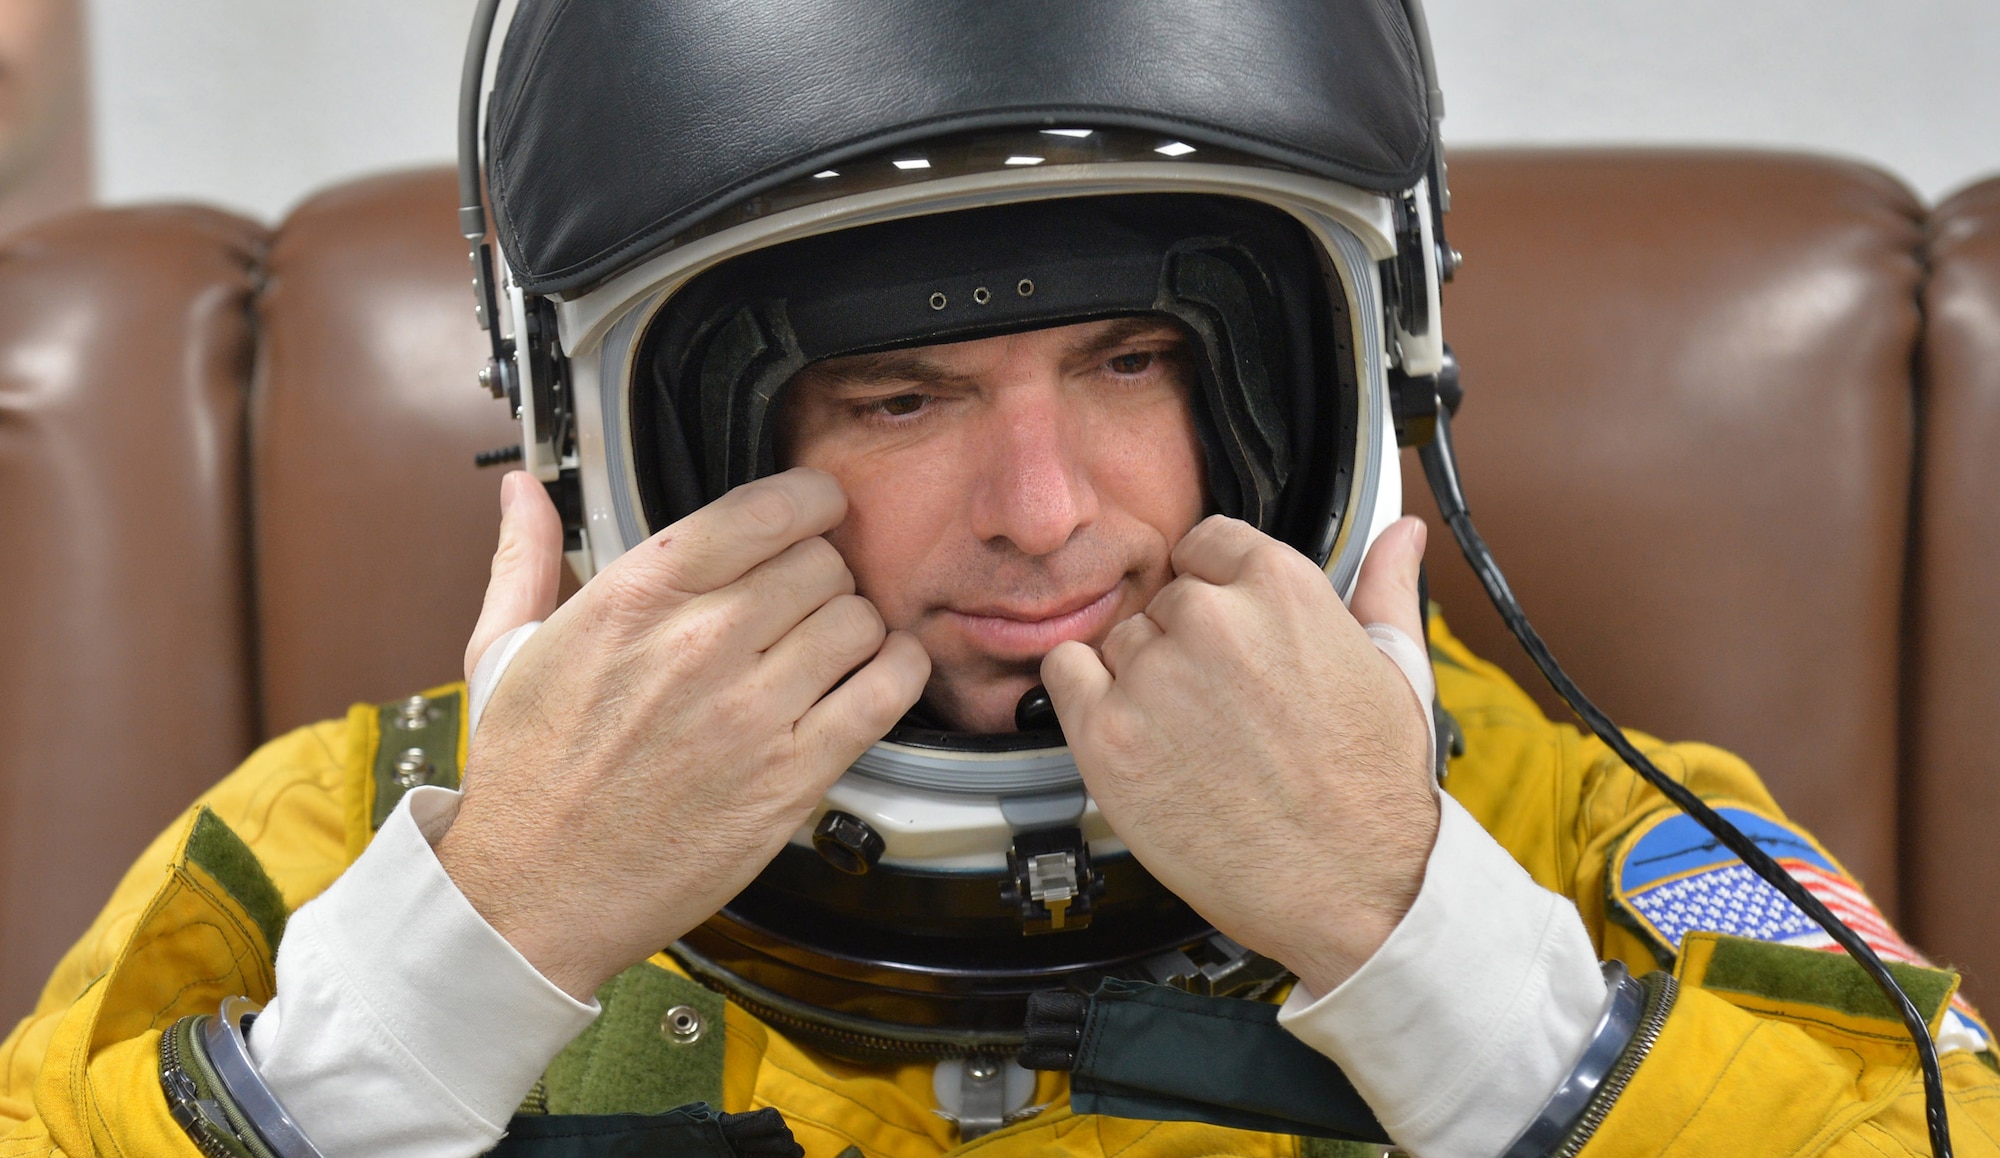 Lt. Col. David, Expeditionary Reconnaissance Squadron U-2 pilot, adjusts his full pressure suit helmet at an undisclosed location in Southwest Asia Aug. 7, 2015. U-2 pilots are required to wear the specialized suit due to the high altitudes, typically above 70,000 feet, they fly at. The physiological support detachment team is responsible for maintaining the suit, ensuring it functions properly and assisting pilots with donning the gear. (U.S. Air Force photo/Tech. Sgt. Jeff Andrejcik)